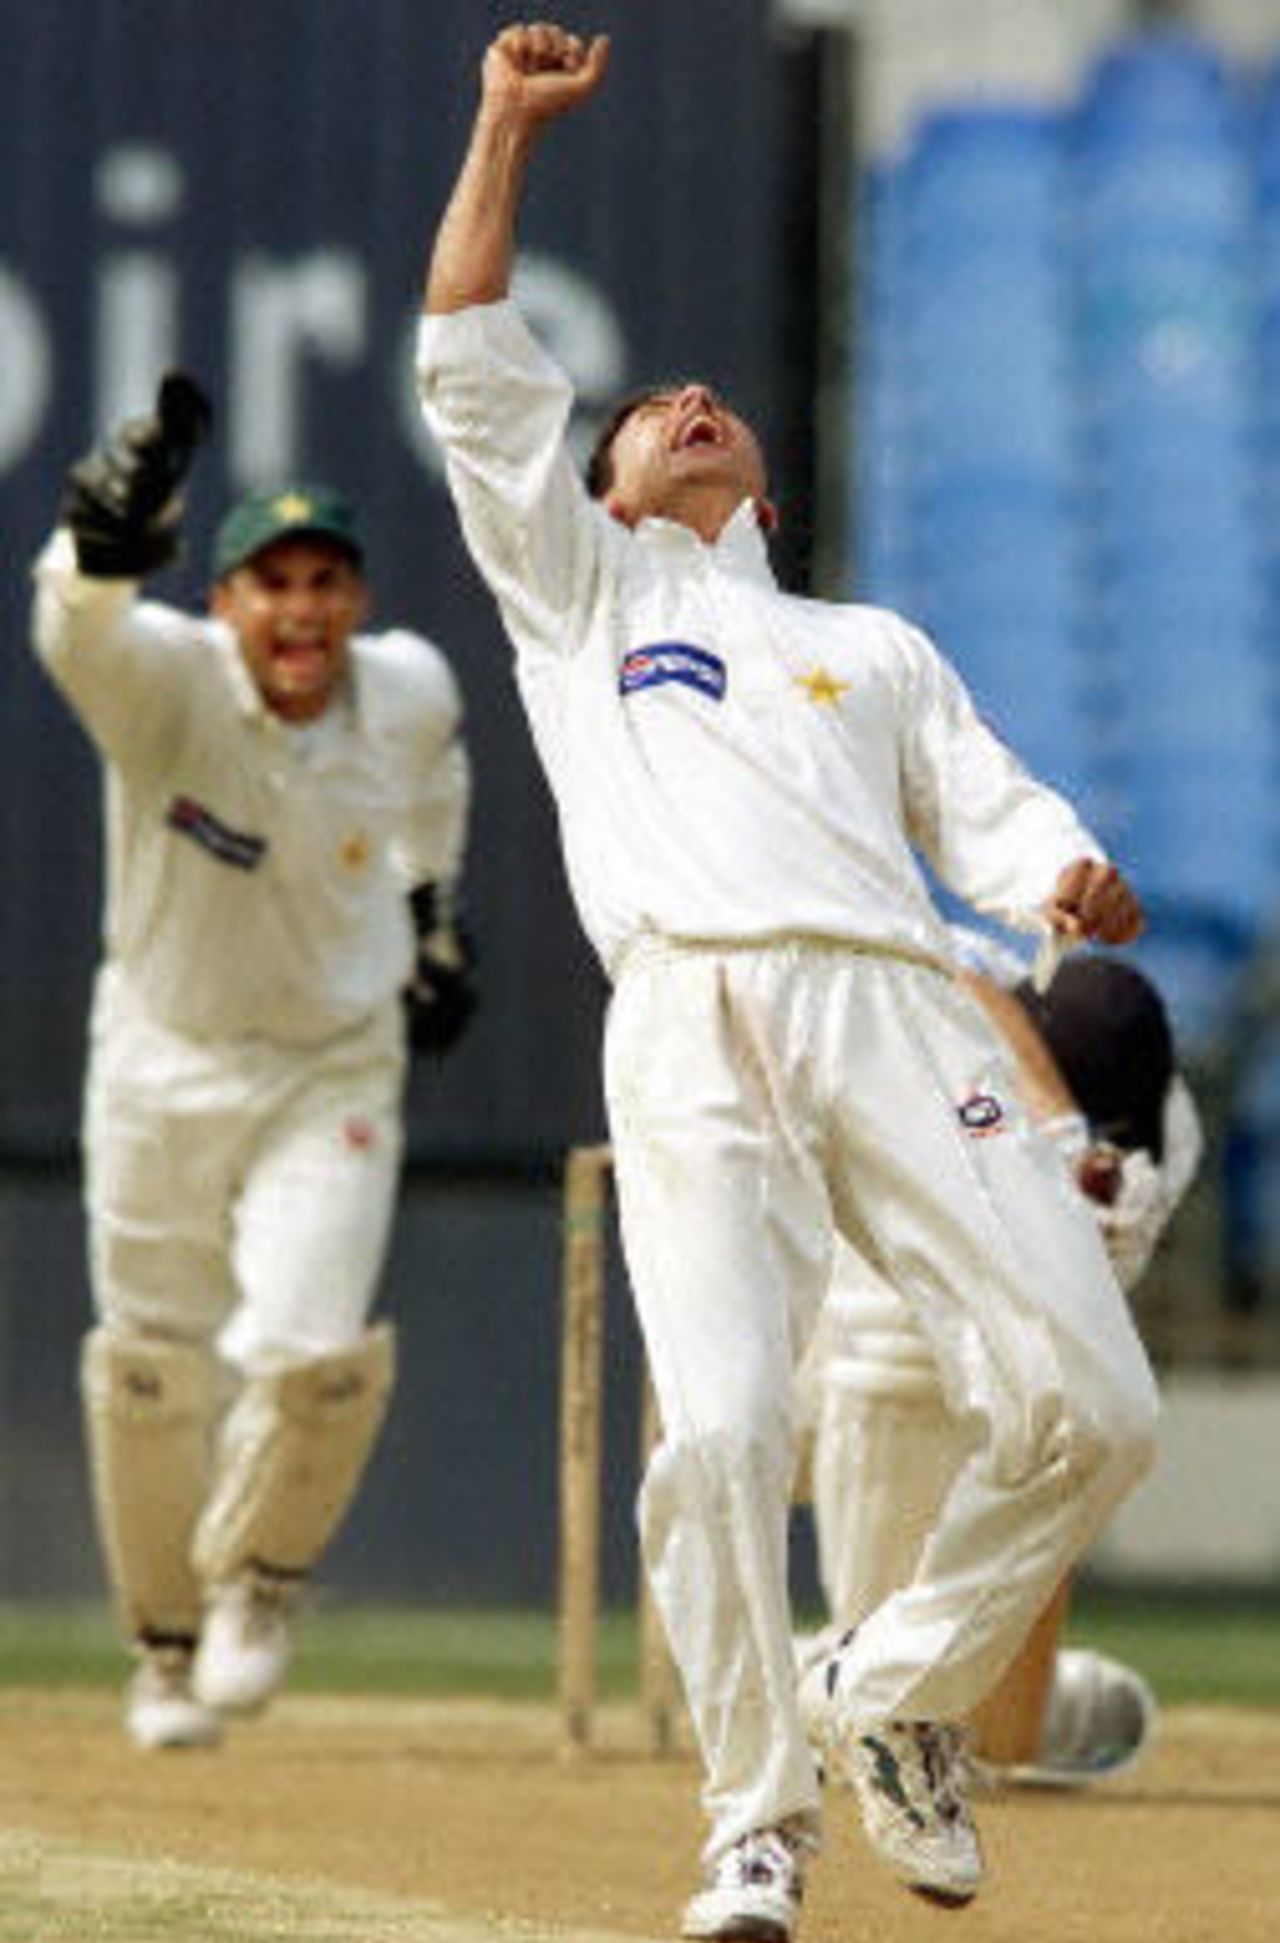 Saqlain Mushtaq celebrates dismissing Stephen Fleming LBW as Moin Khan joins in, day 5, 1st Test at Eden Park in Auckland, 8-12 March 2001.